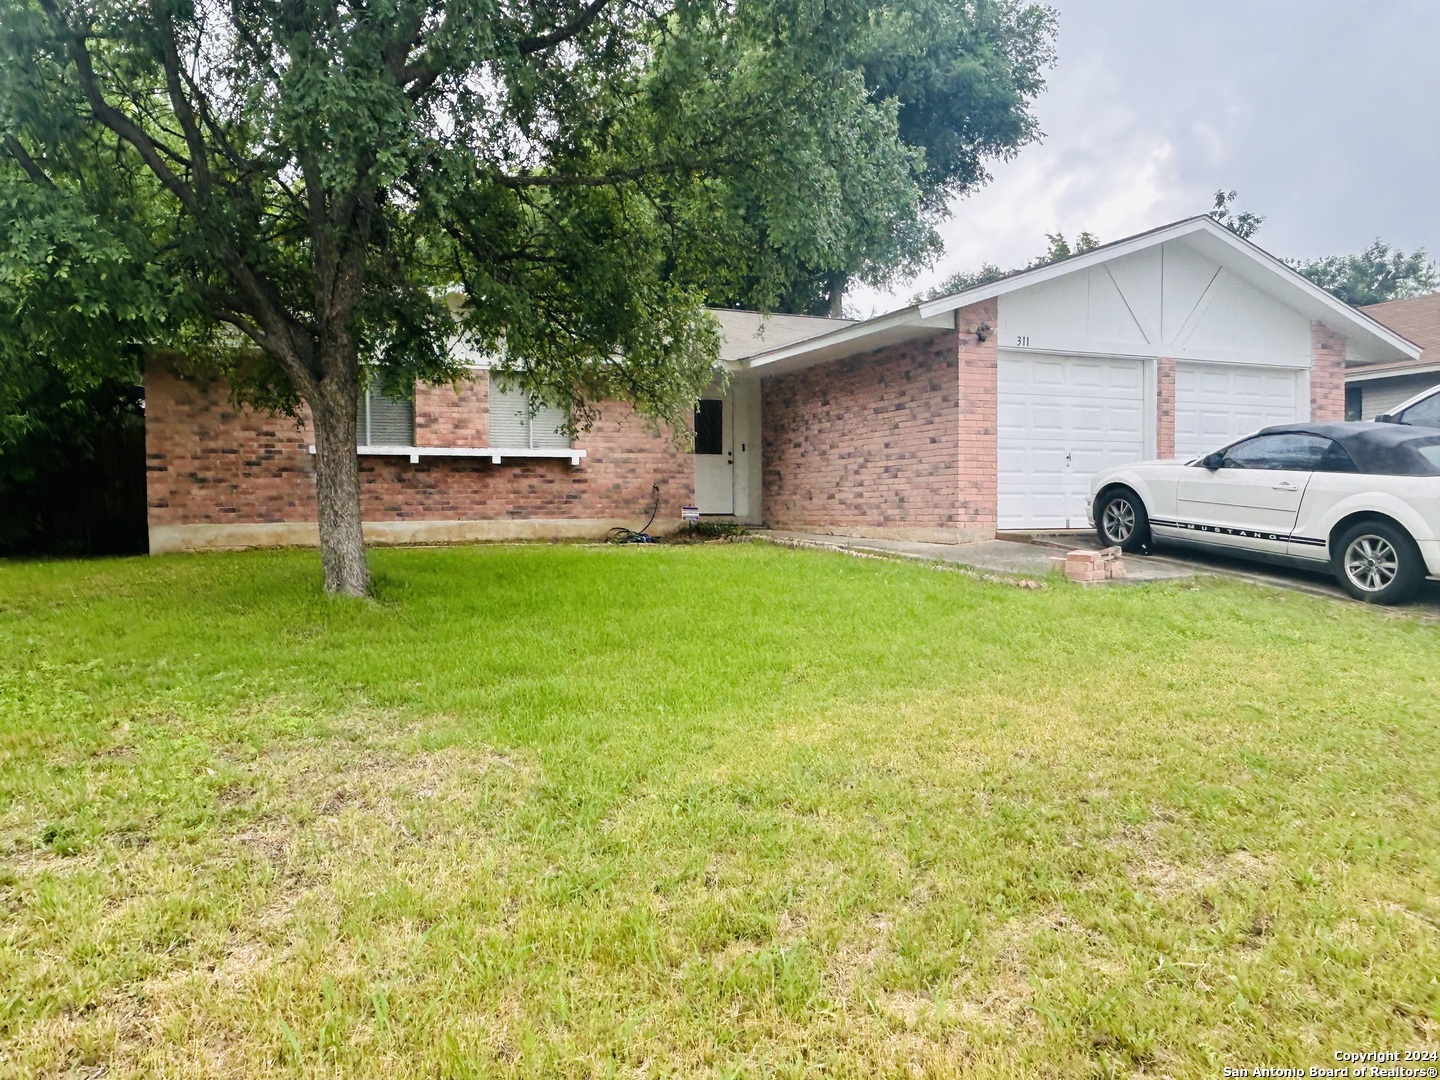 Photo of 311 Kingsman St in Converse, TX